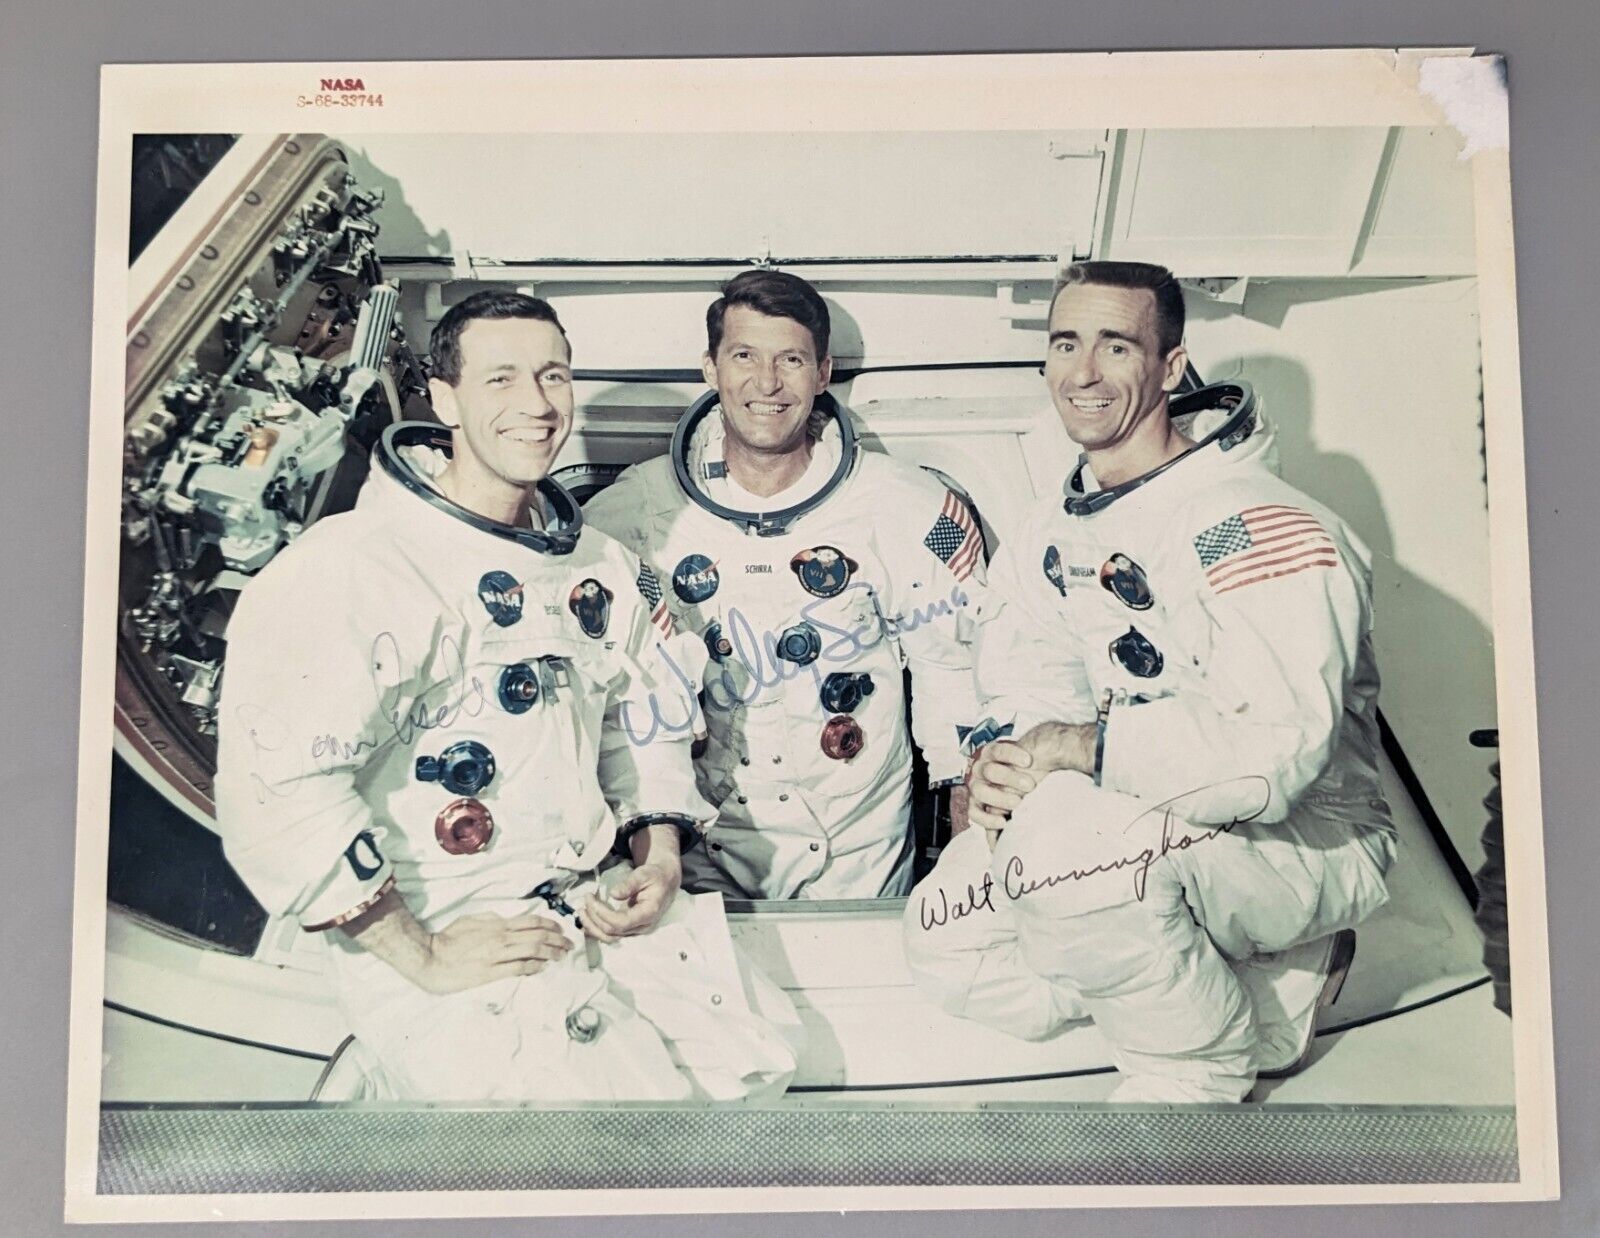 NASA Red Letter Signed Space Photo Apollo 7 Astronauts Schirra Eisele Cunningham